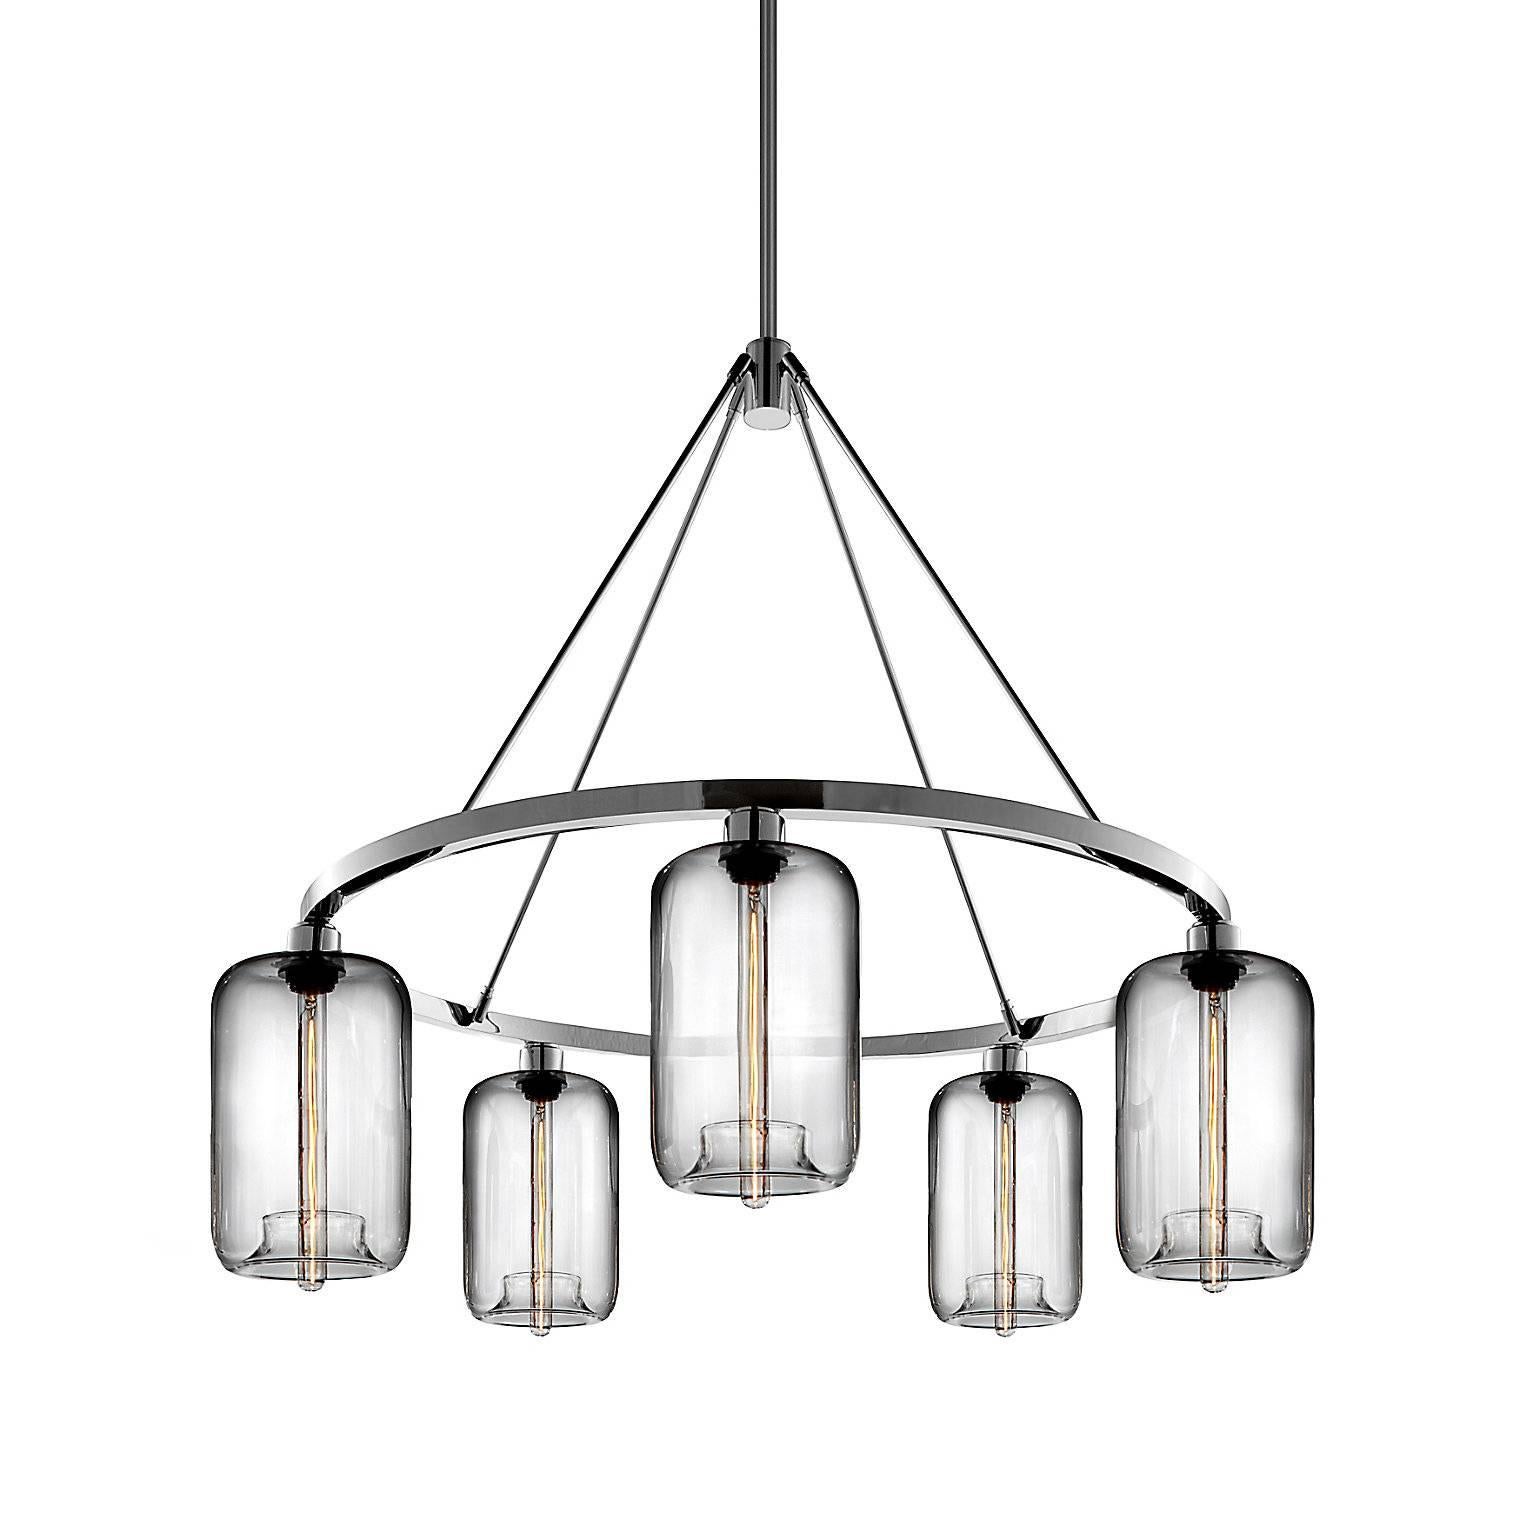 A statement piece designed to attract attention to the brilliant Pod pendant, this chandelier captivates as it suspends elegant handblown shades. Every single glass light that comes from Niche is handblown by real human beings in a state-of-the-art